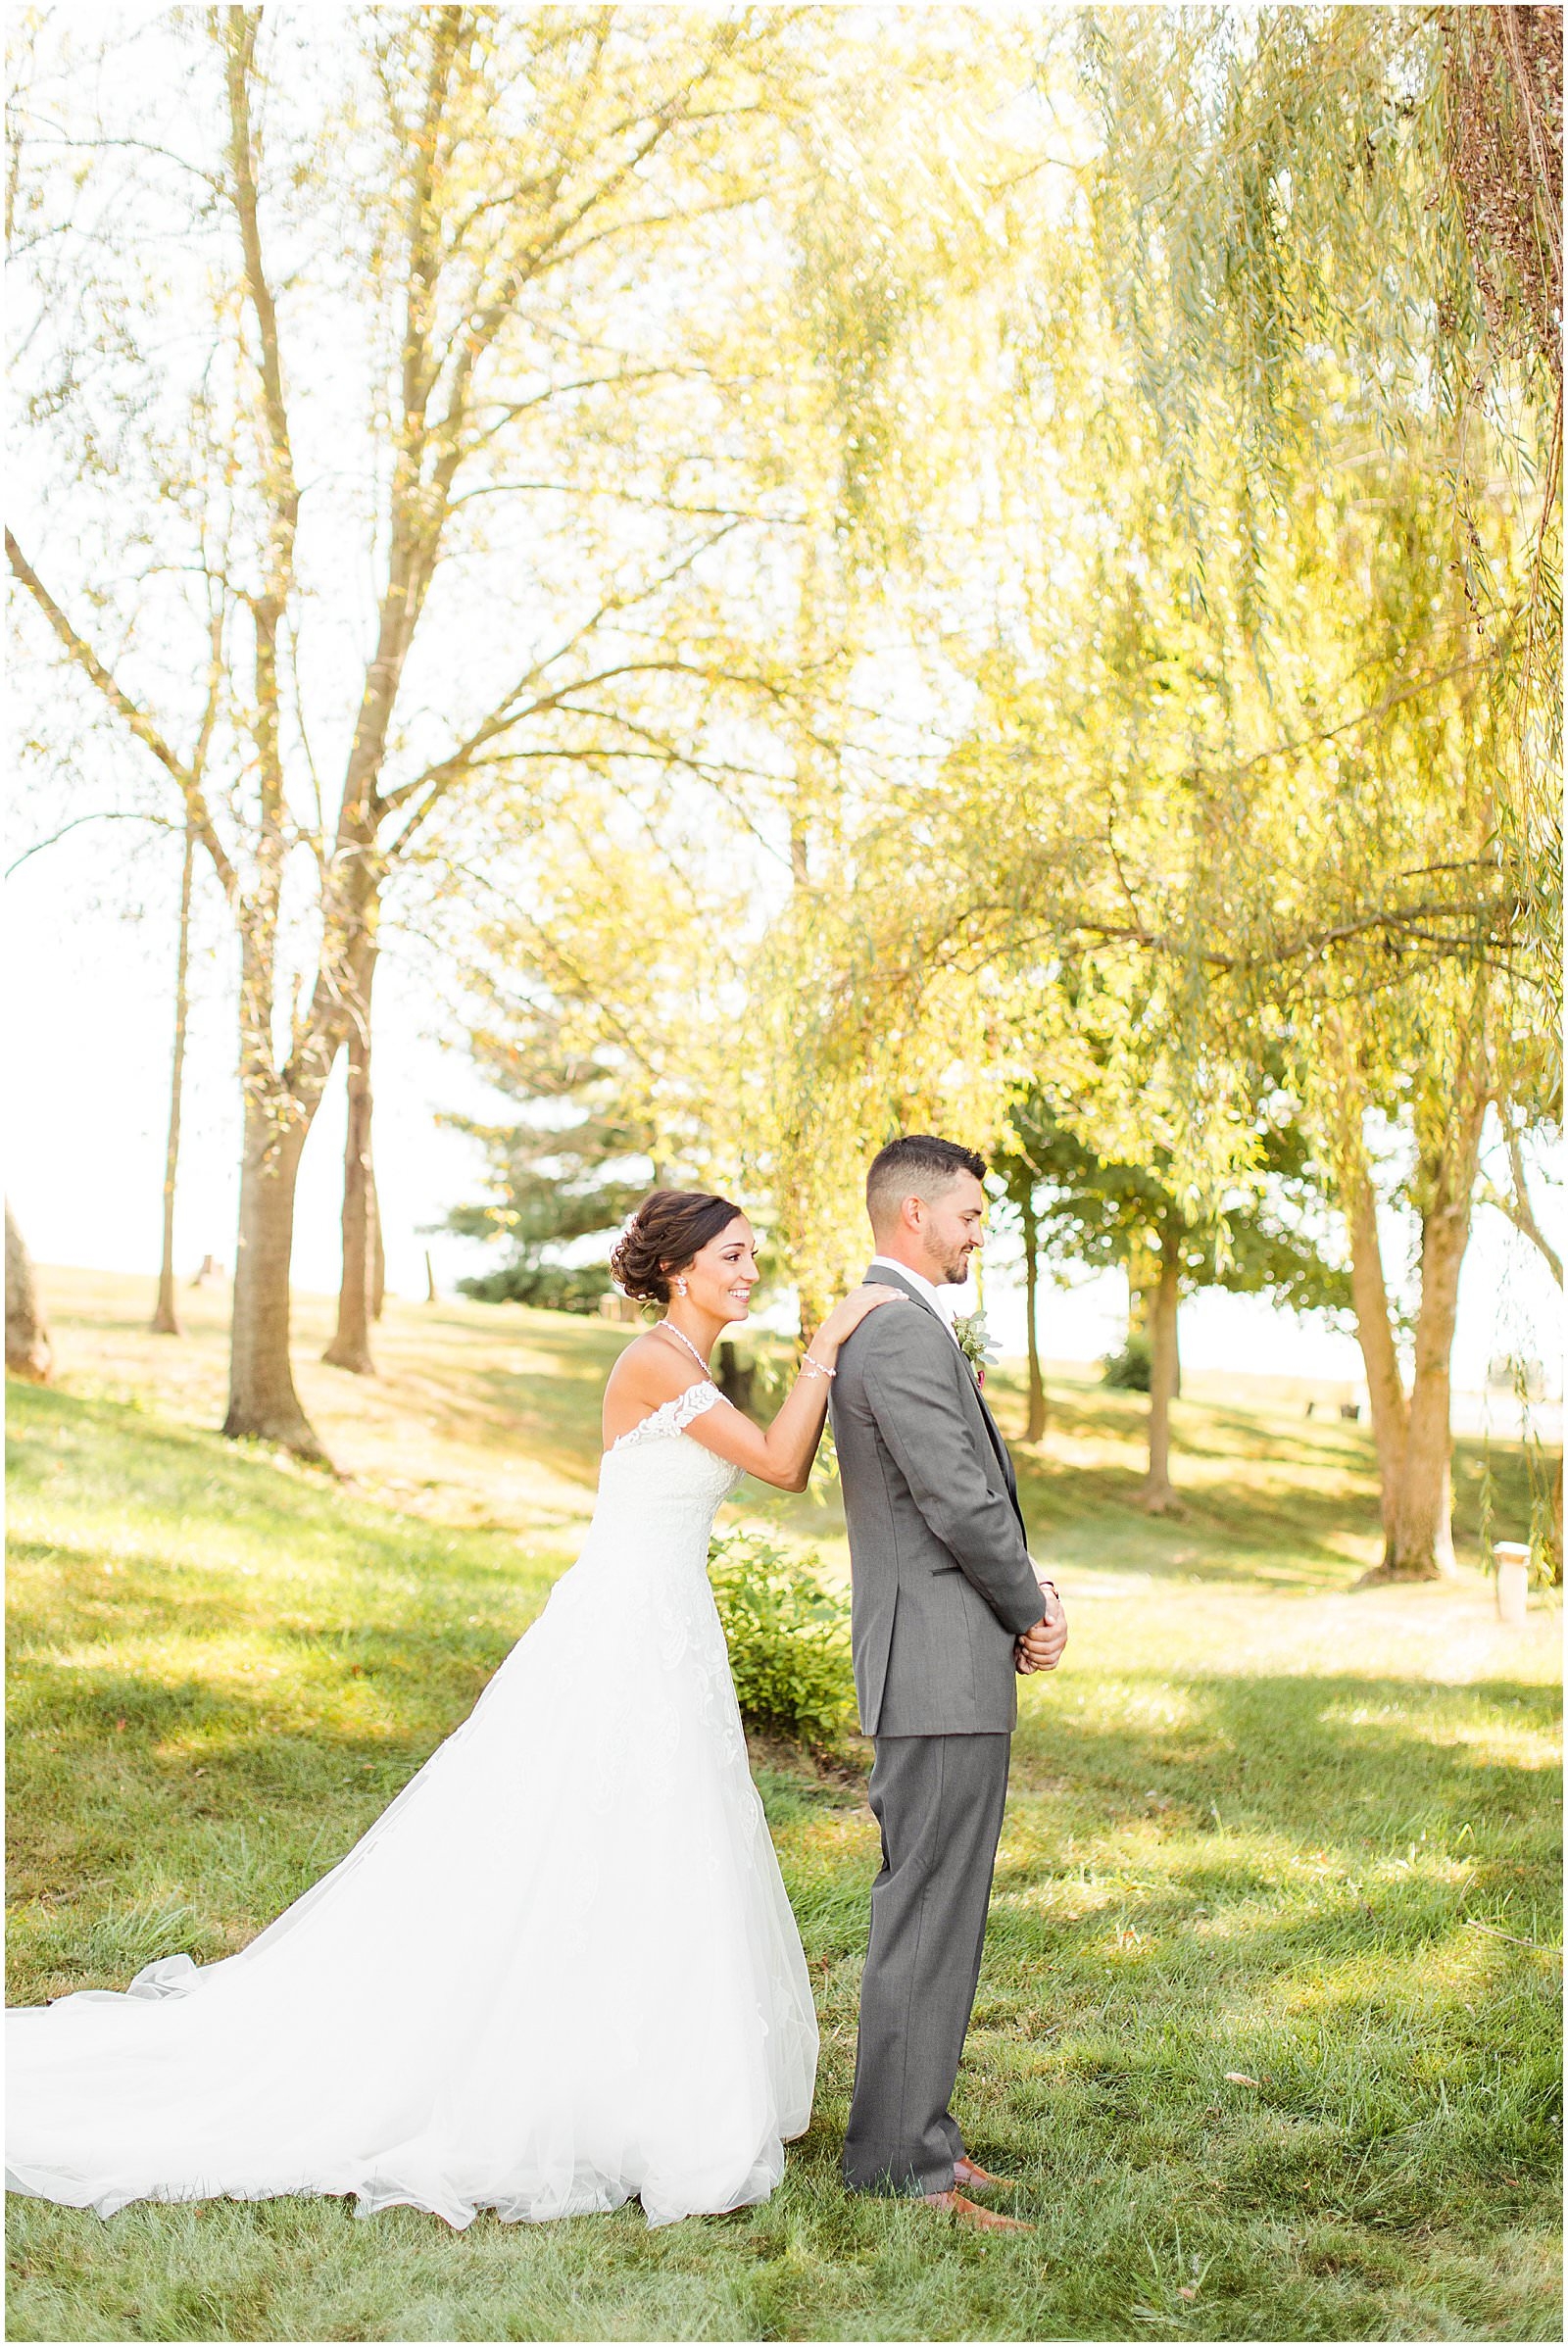 A Stunning Fall Wedding in Indianapolis, IN |. Sally and Andrew | Bret and Brandie Photography 0045.jpg